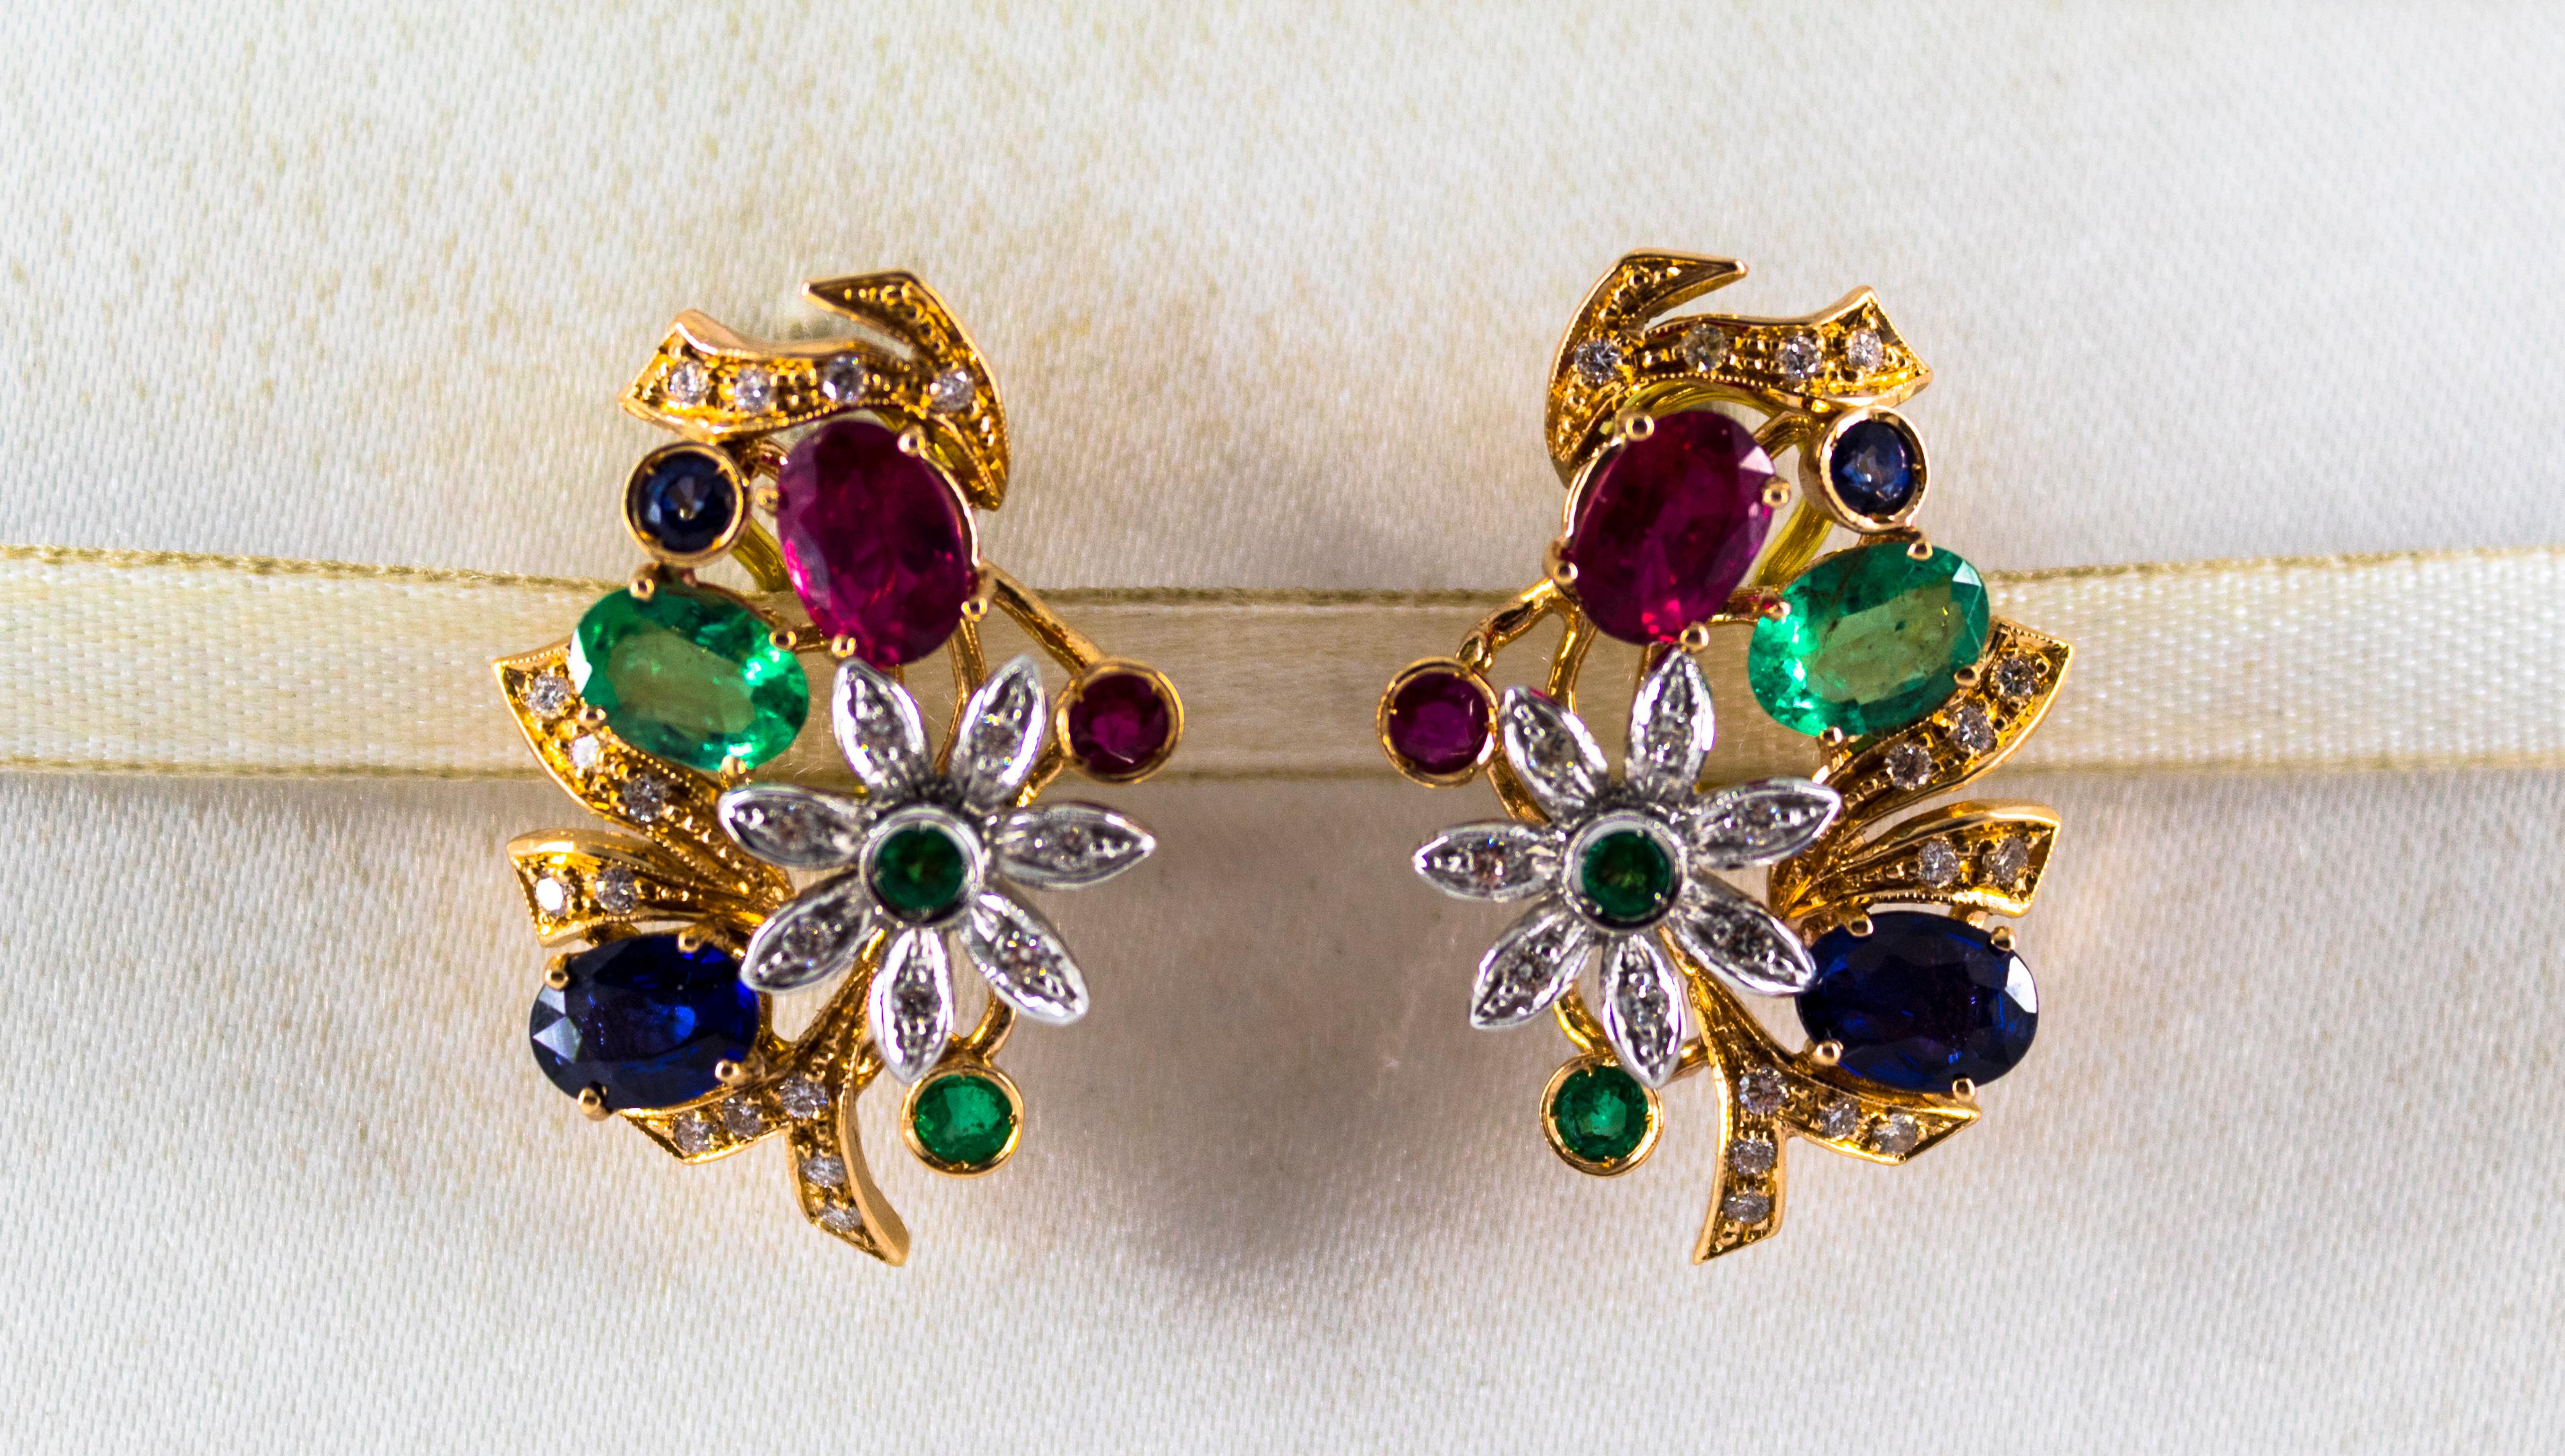 These Clip-On Earrings are made of 14K Yellow Gold.
These Earrings have 0.40 Carats of White Diamonds.
These Earrings have 1.80 Carats of Emeralds.
These Earrings have 1.70 Carats of Rubies.
These Earrings have 1.70 Carats of Blue Sapphires.
All our